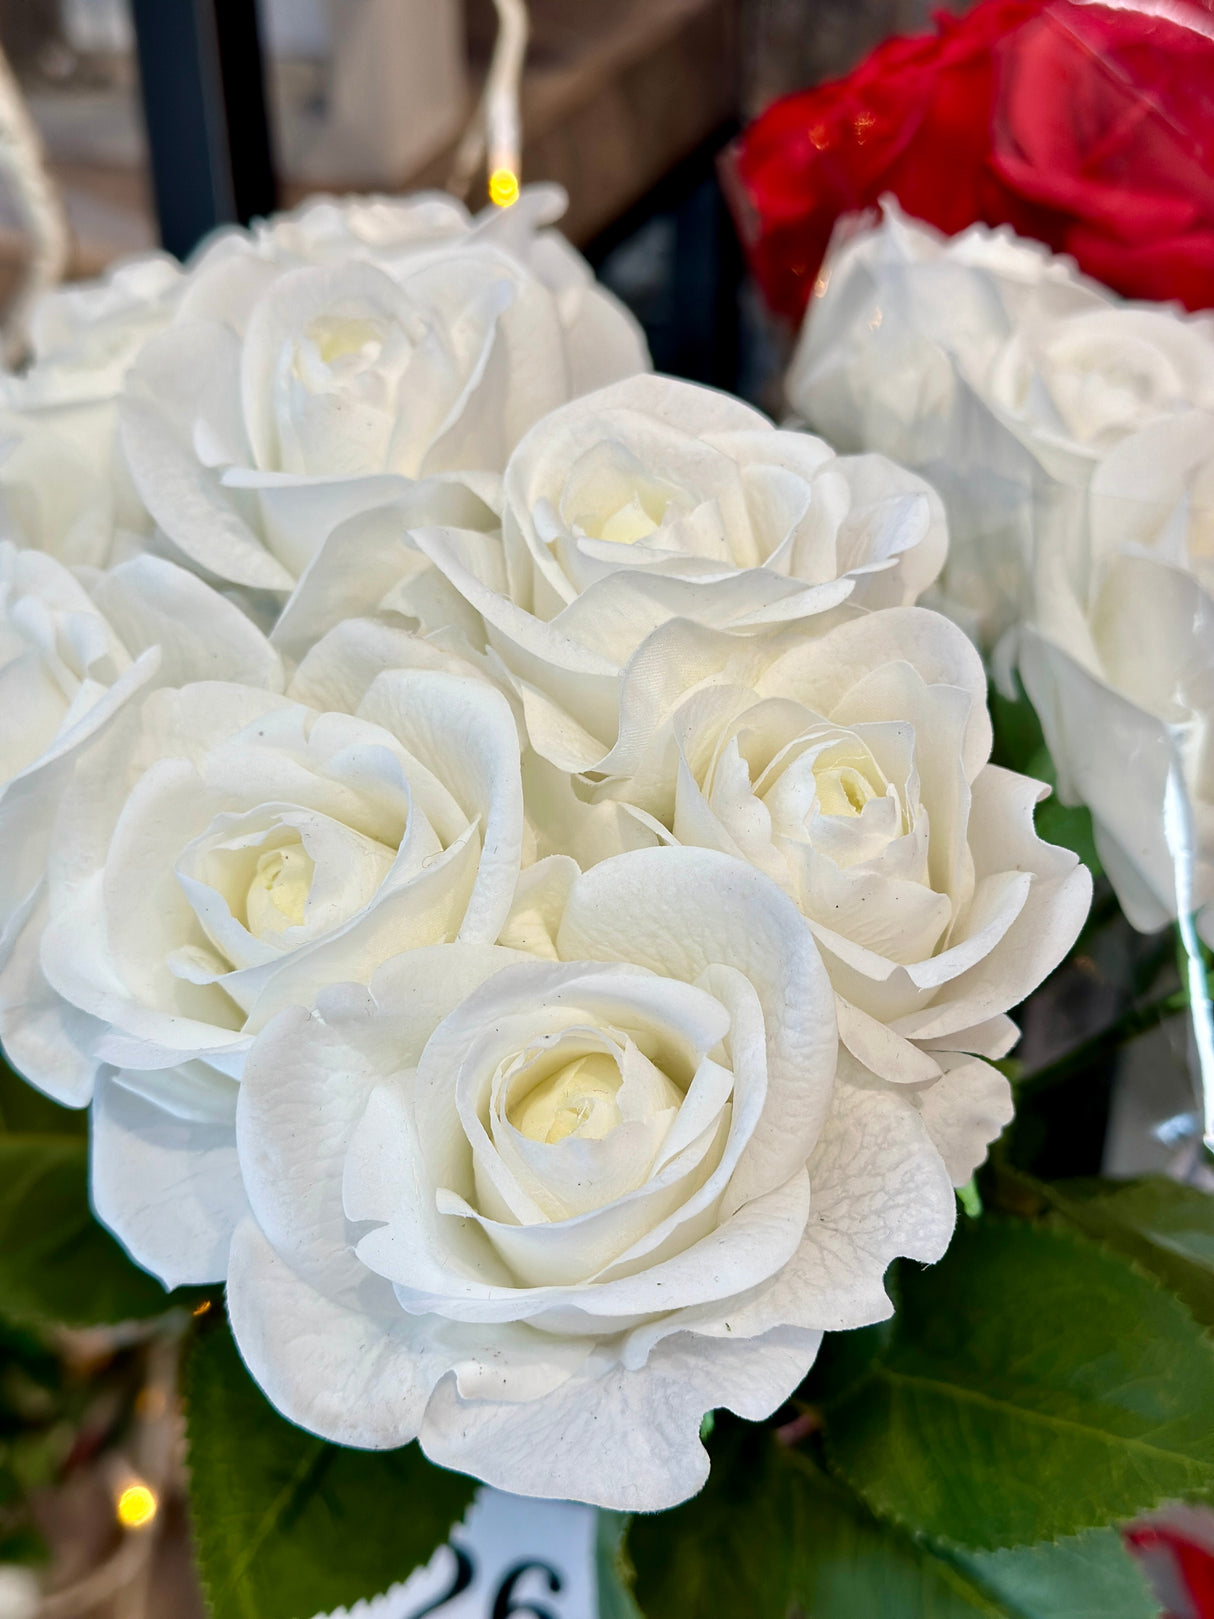 White Real Touch Full Bloom Rose Bundle